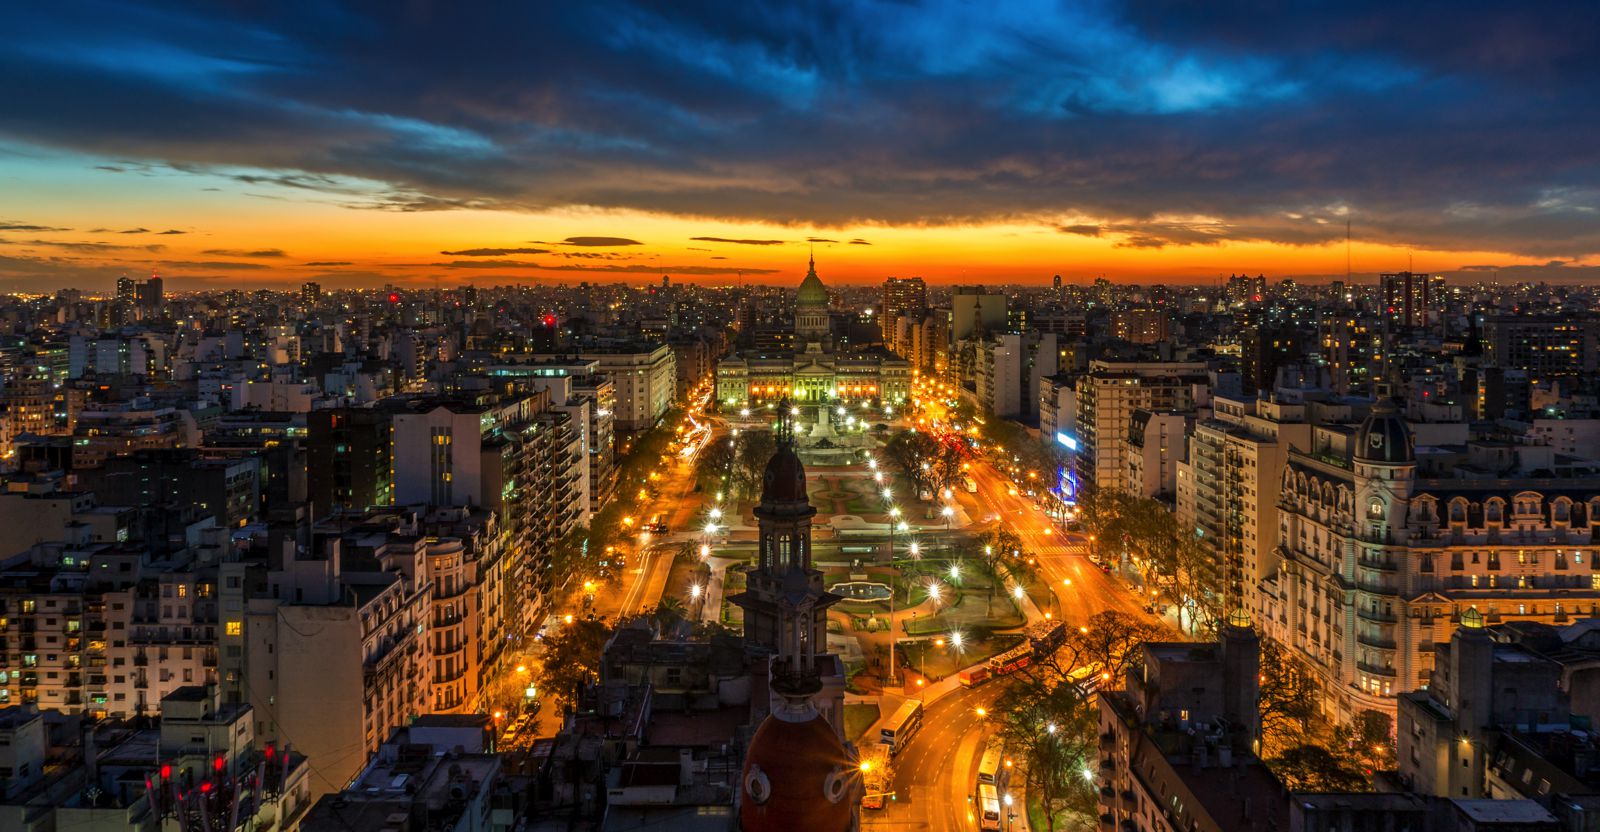 10 Amazing Cities In South America You Have To Visit This Year (11)